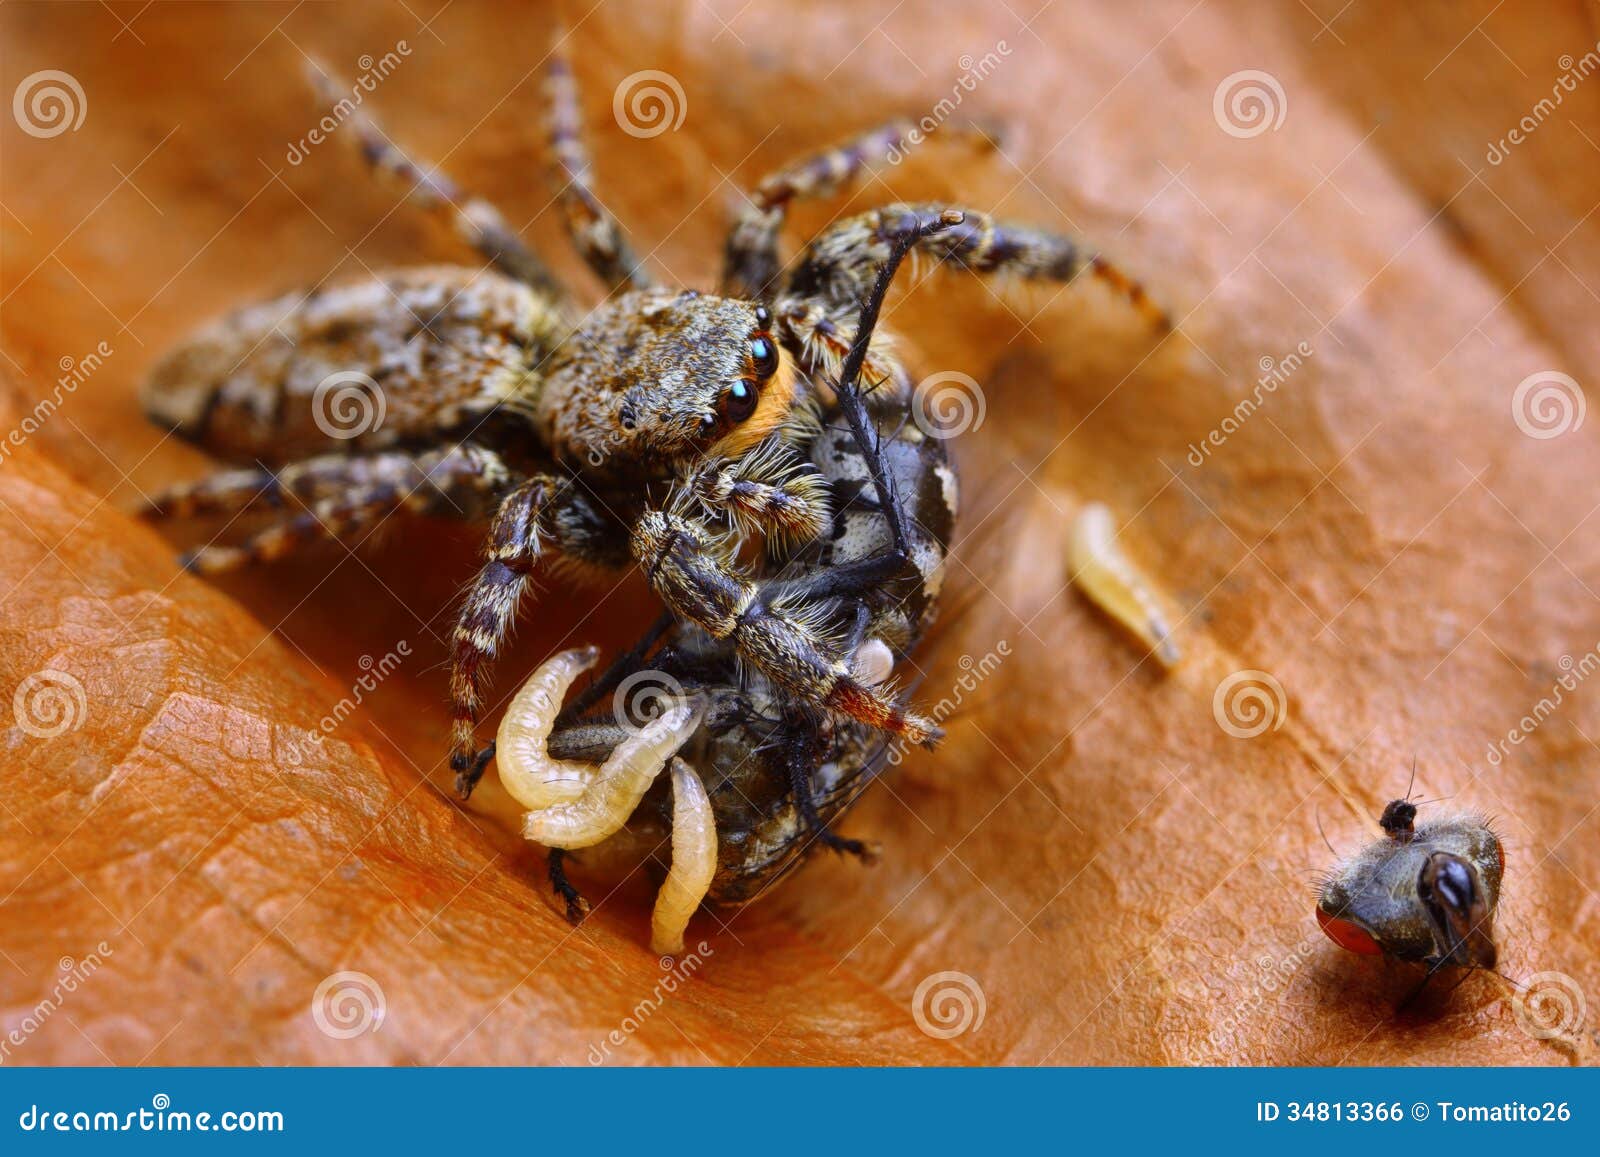 Marpissa Muscosa Jumping Spider Eating Fly Stock Photo 